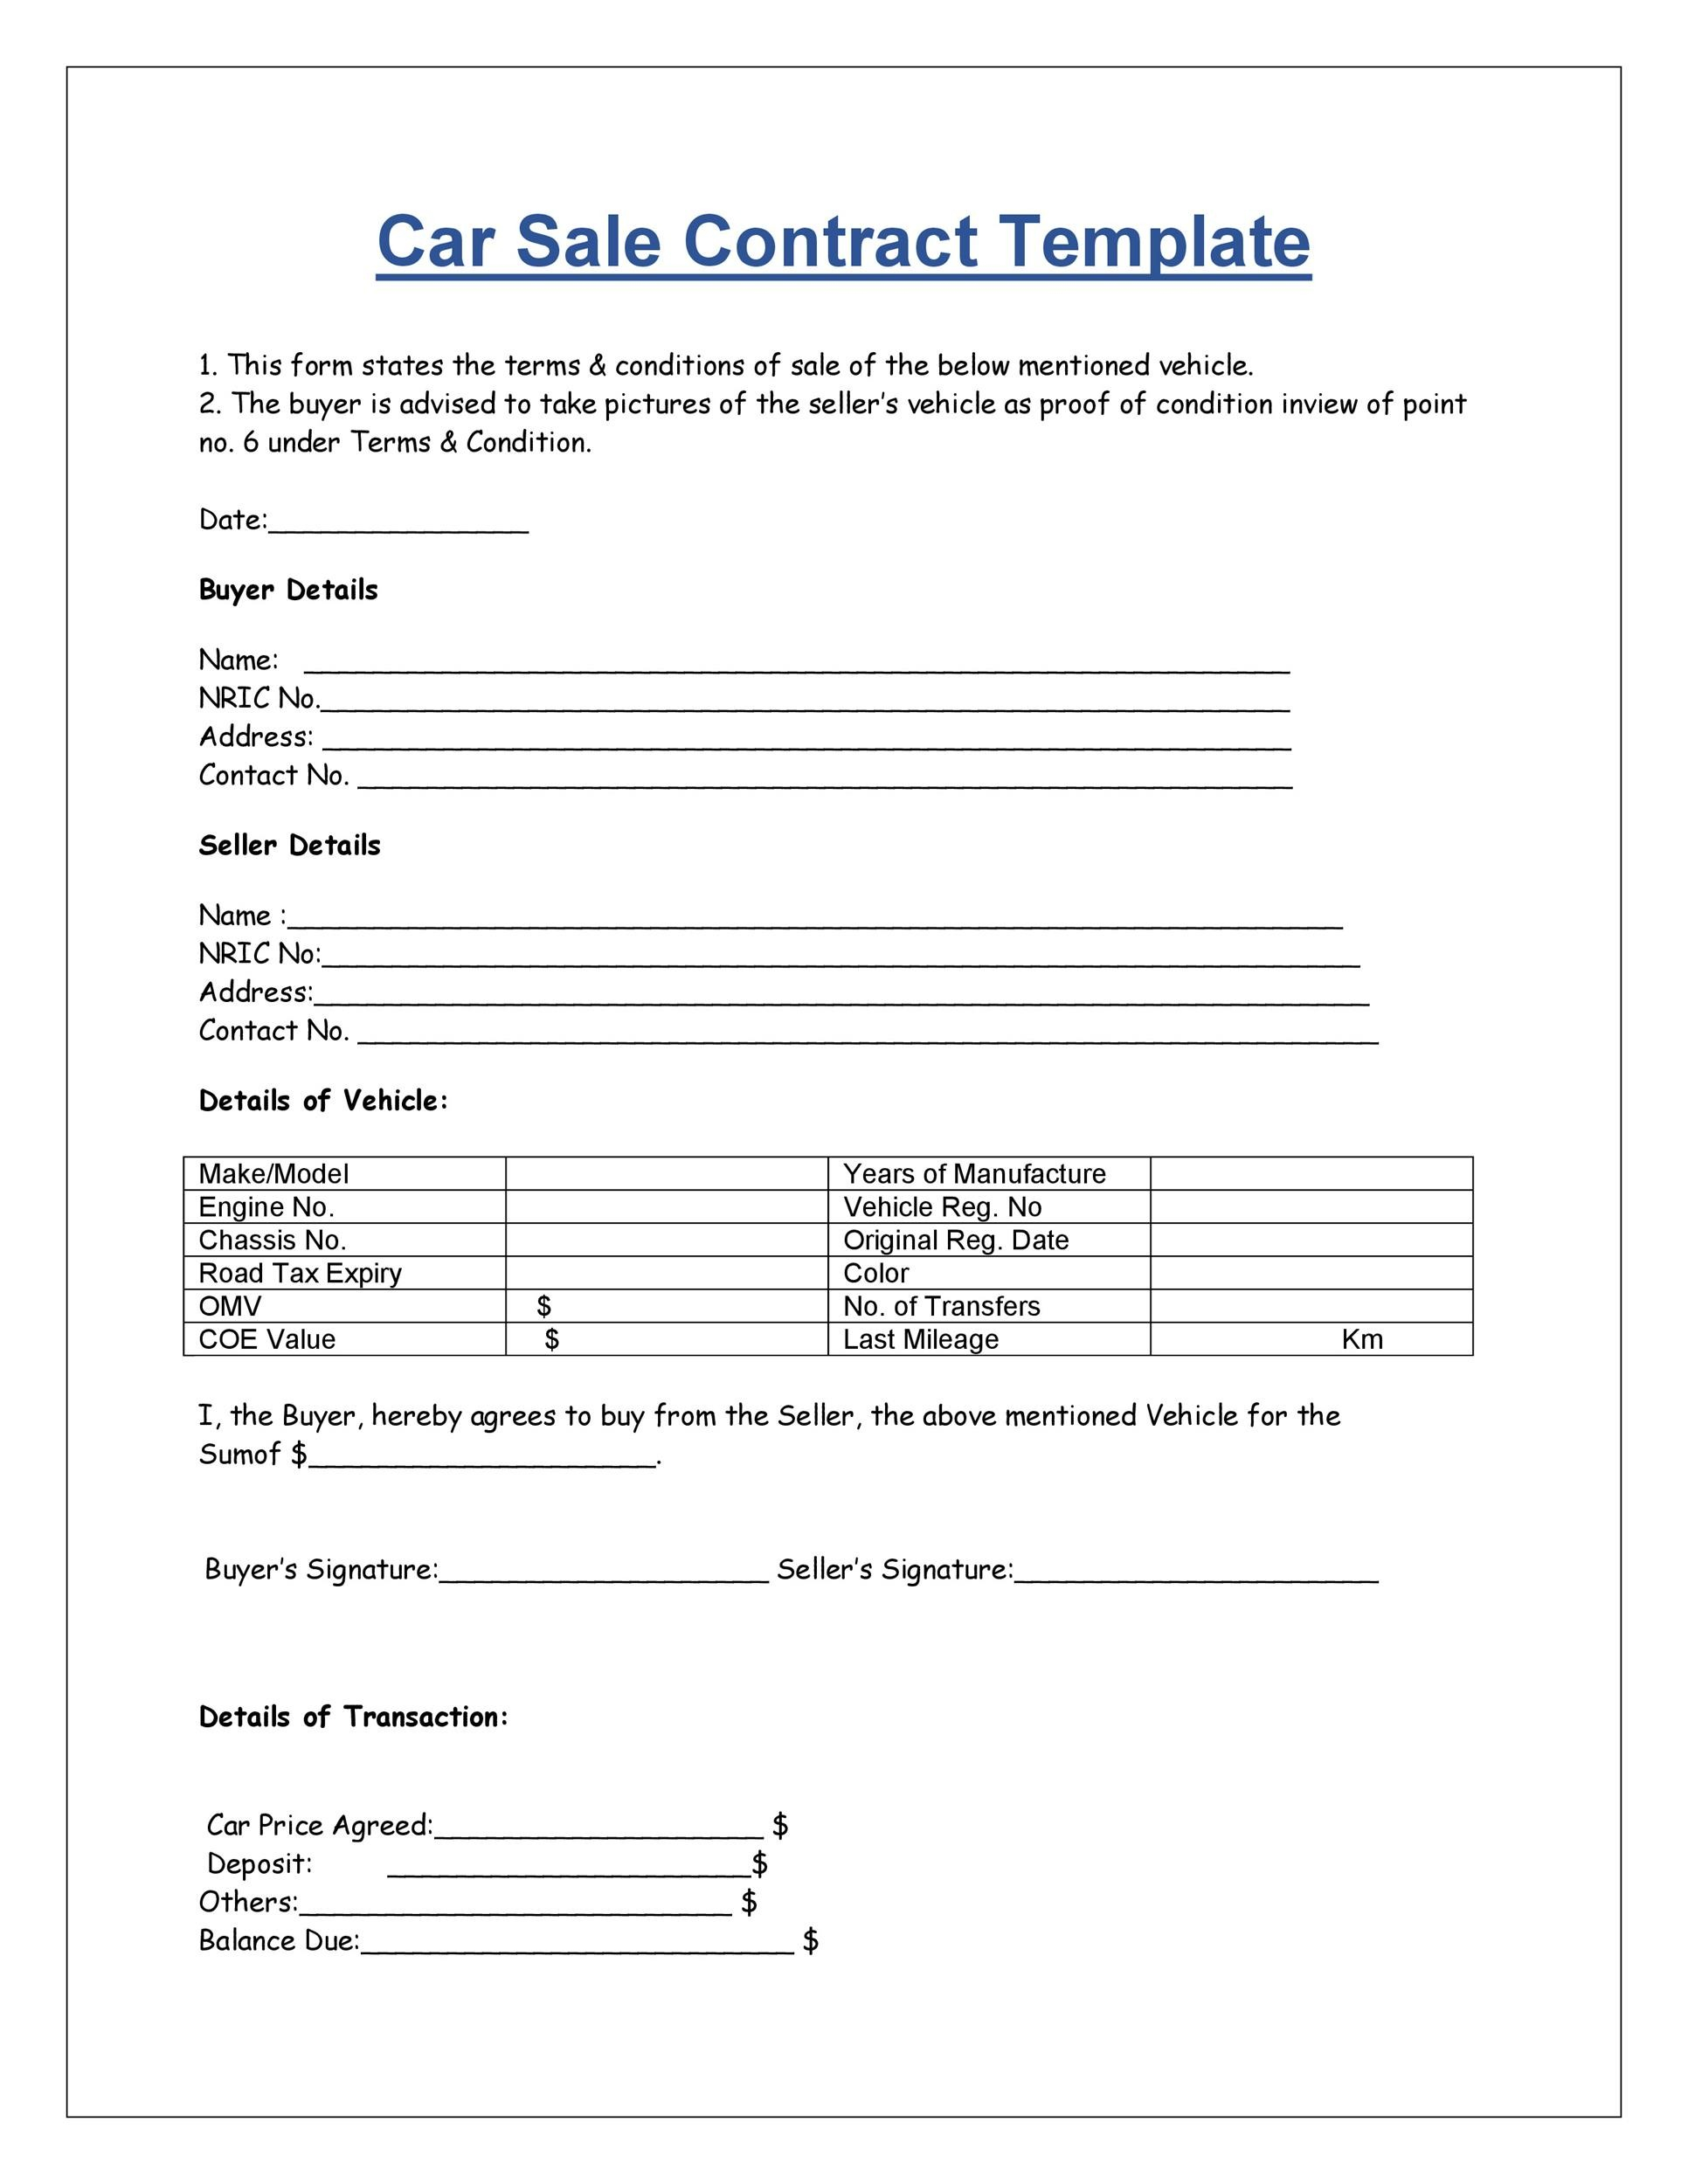 10 Printable Vehicle Purchase Agreement Templates ᐅ TemplateLab Regarding Deposit Form For Vehicle Purchase